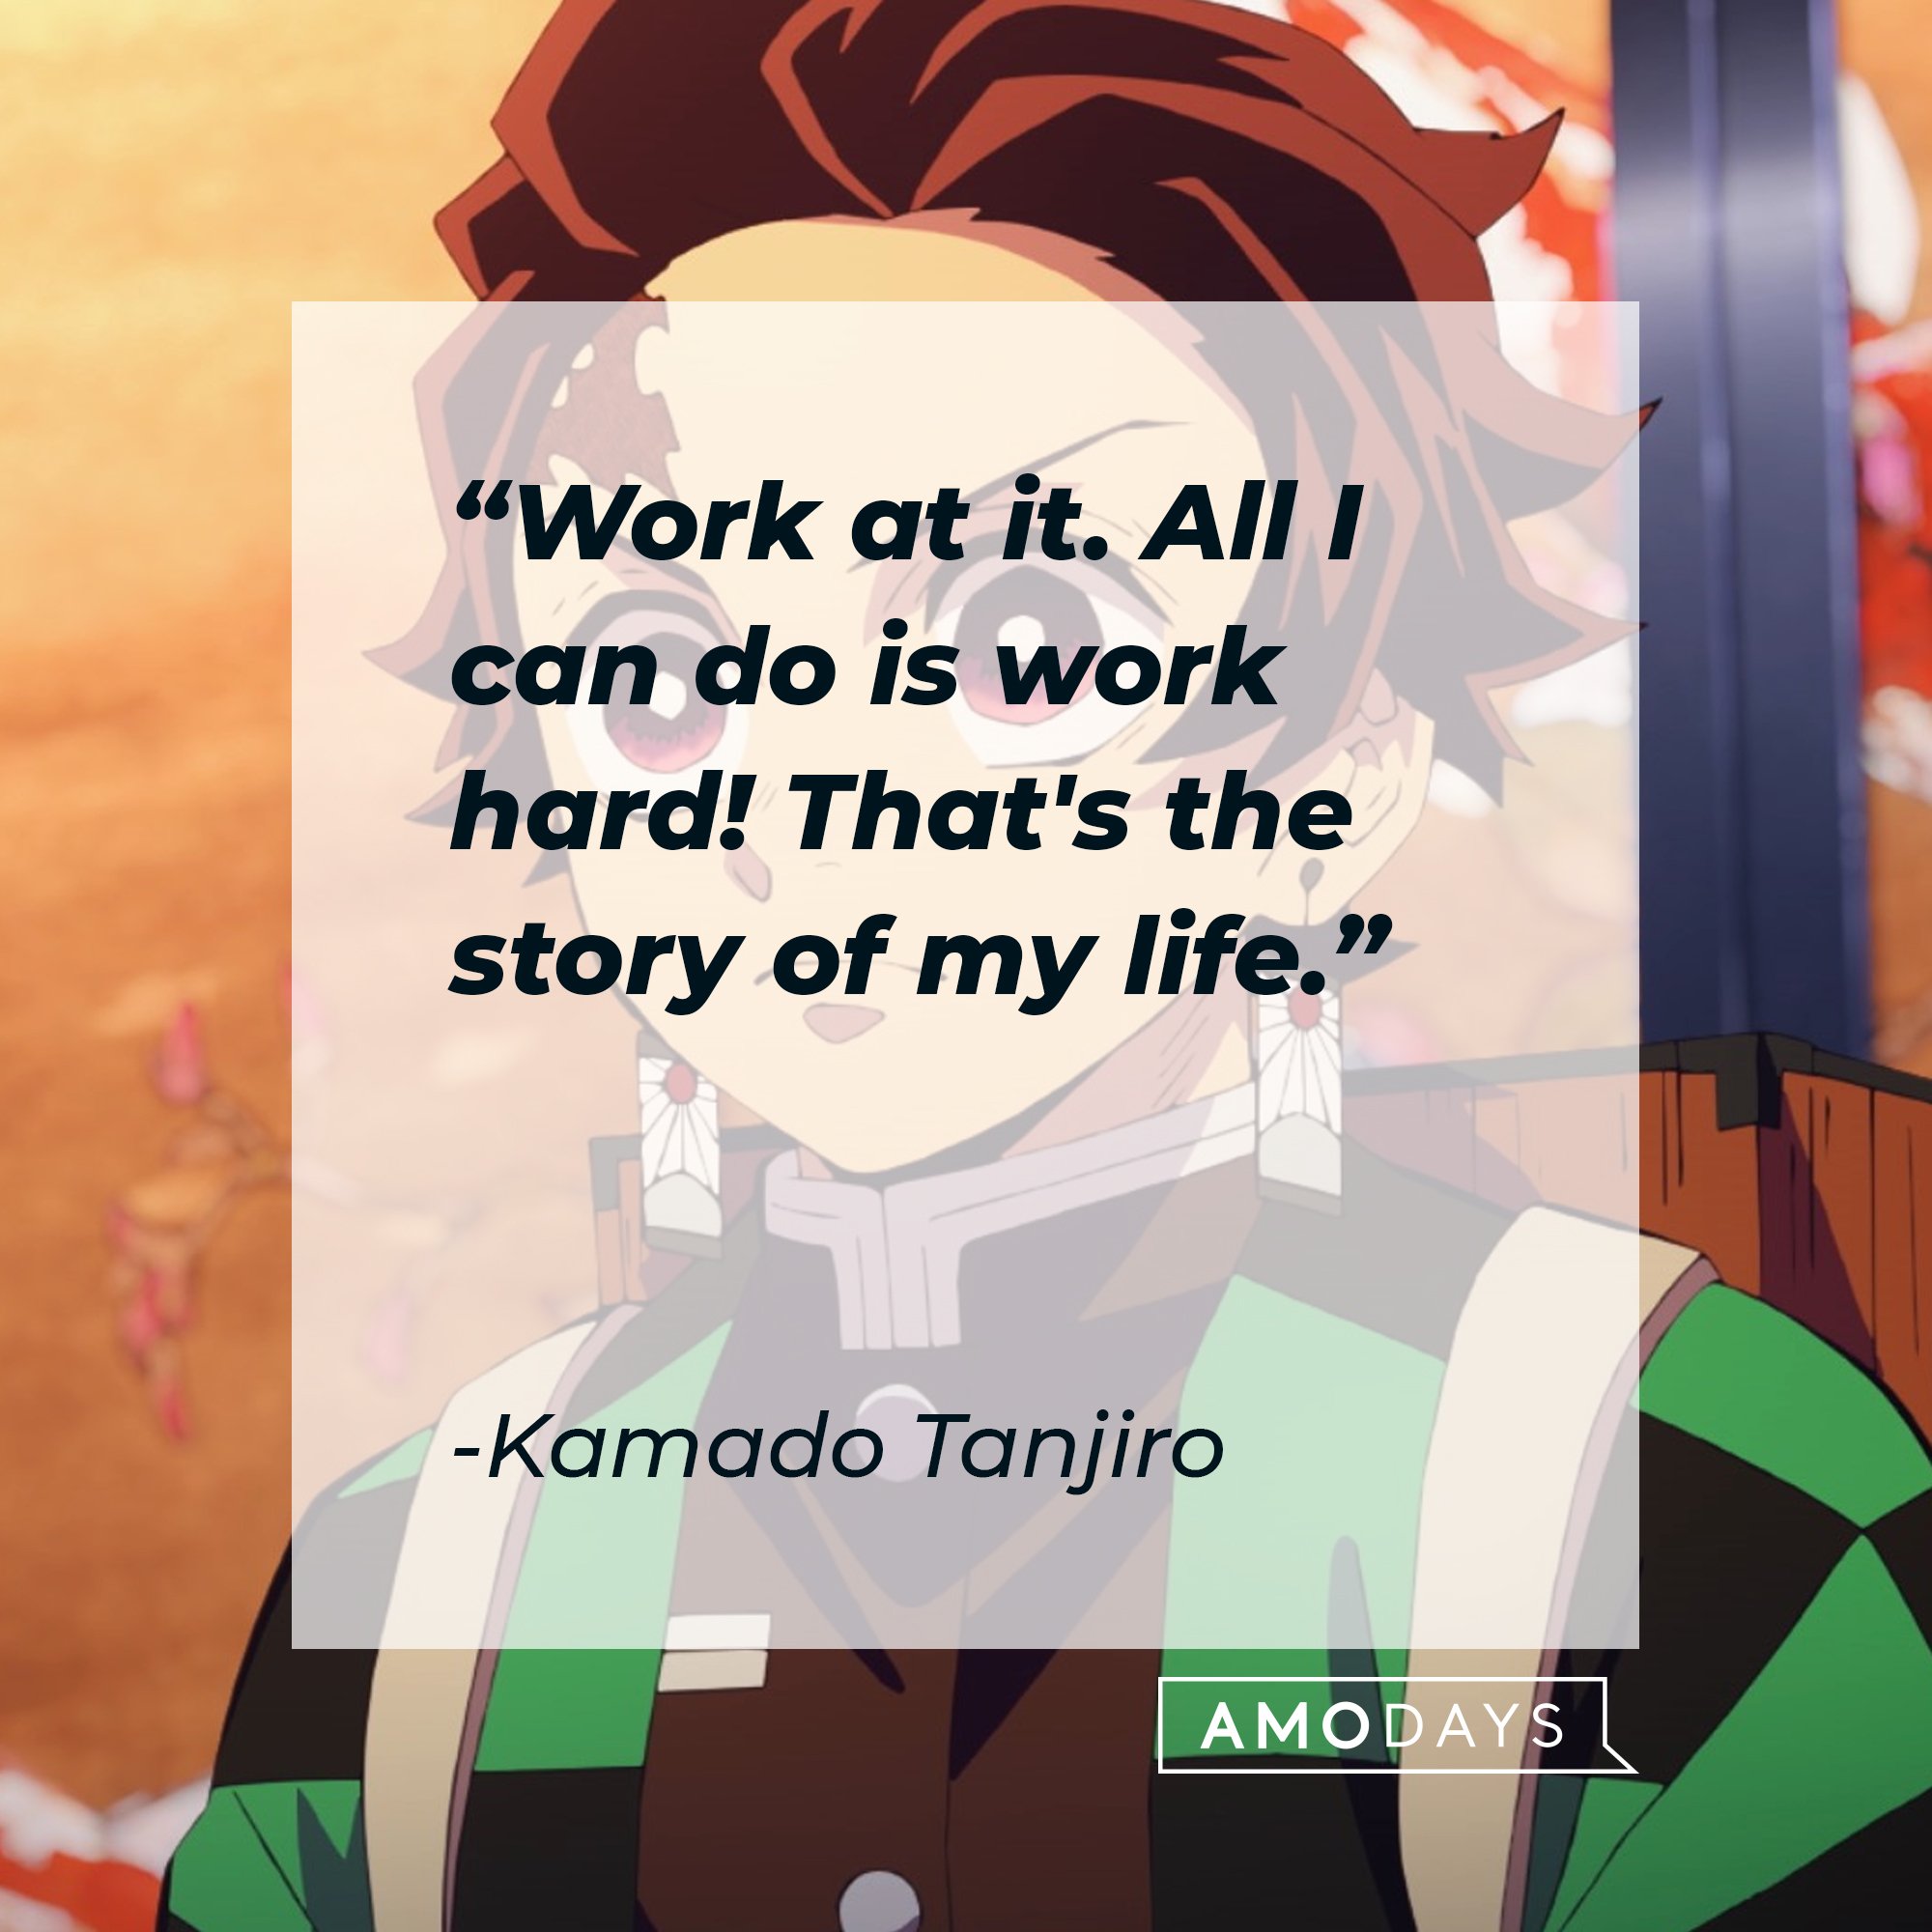 Kamado Tanjiro’s quote: "Work at it. All I can do is work hard! That's the story of my life." | Image: AmoDays